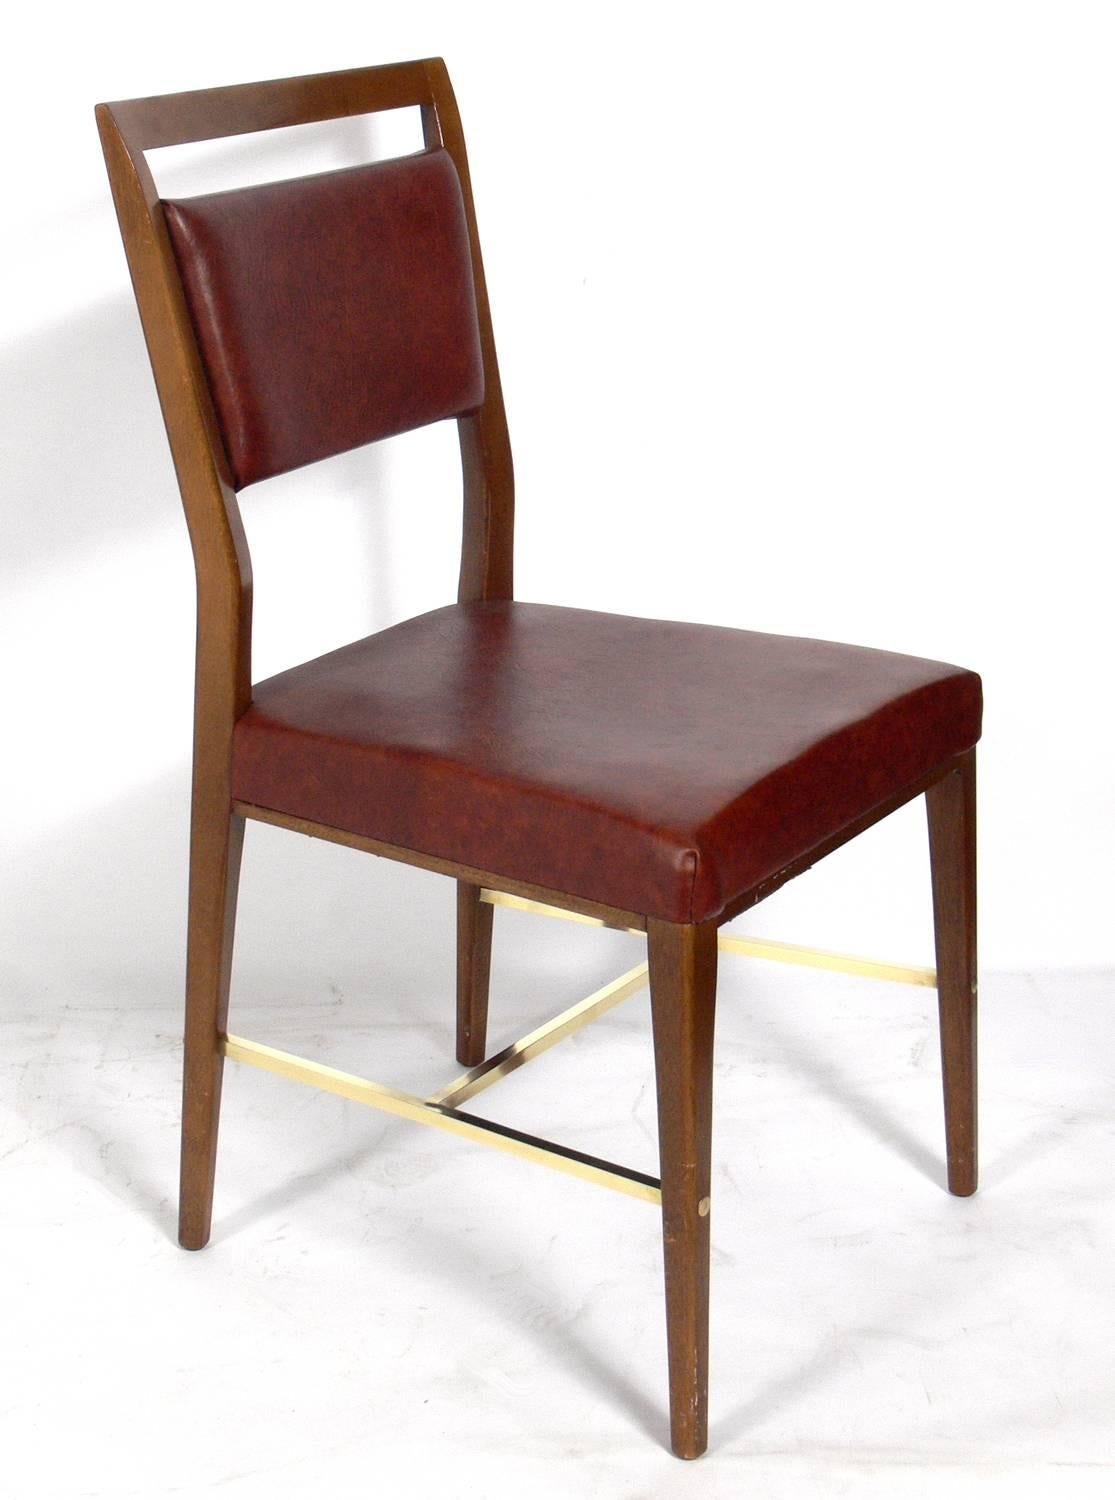 Paul McCobb Dining Chairs In Good Condition For Sale In Atlanta, GA